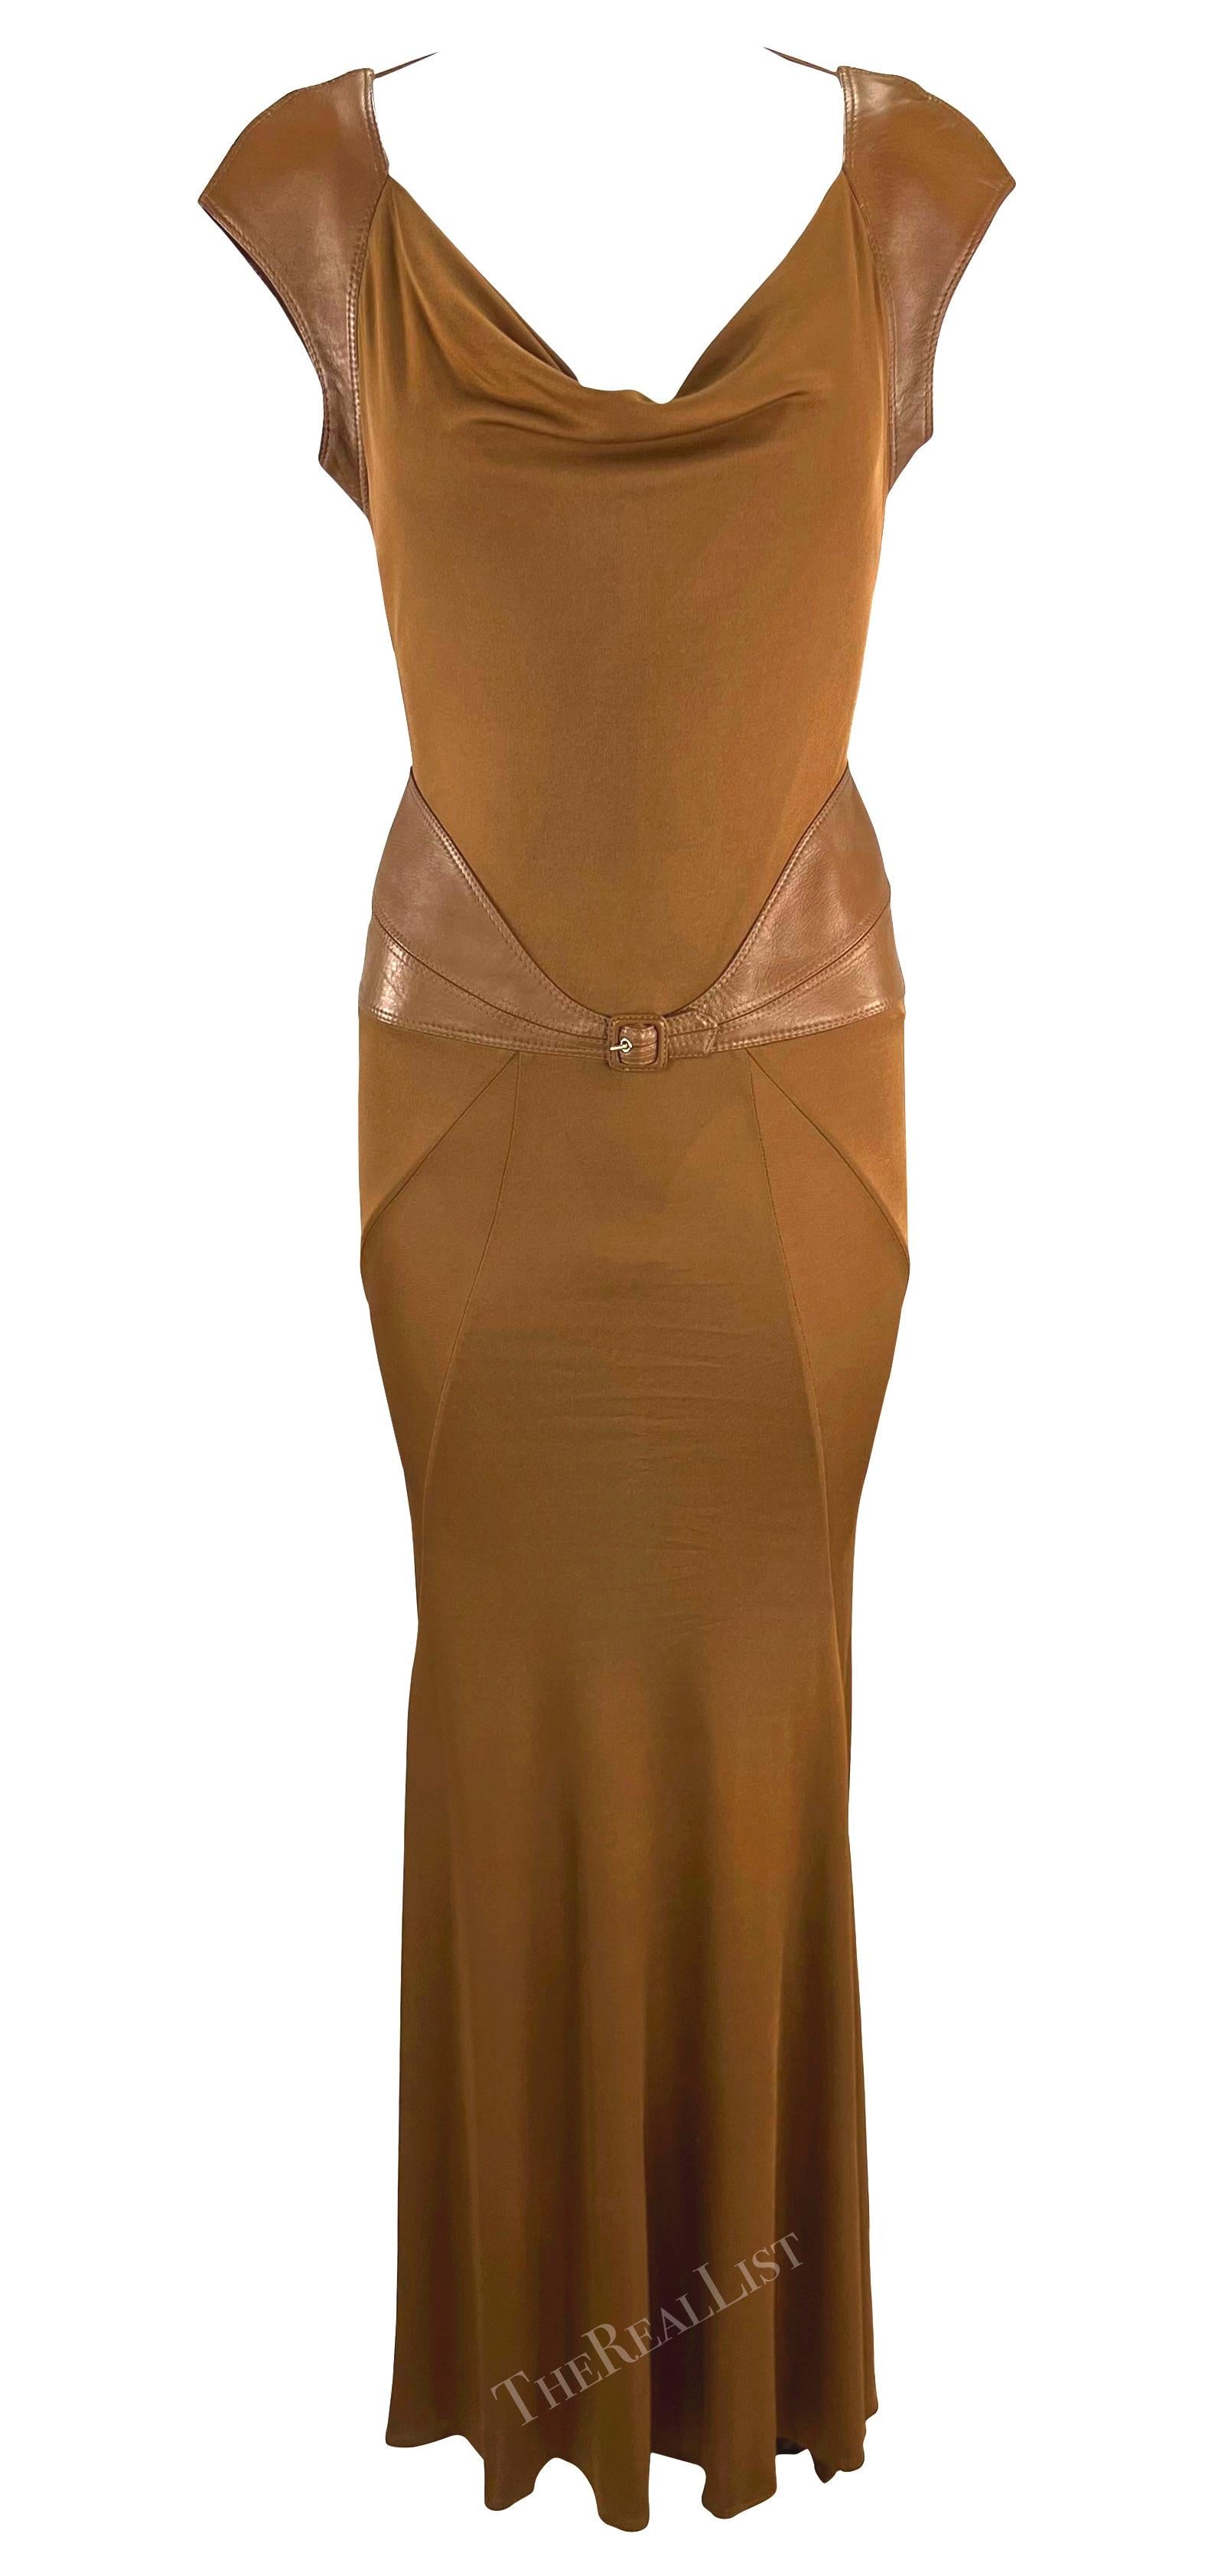 Women's F/W 2001 Gianni Versace by Donatella Runway Saddle Brown Leather Backless Gown For Sale